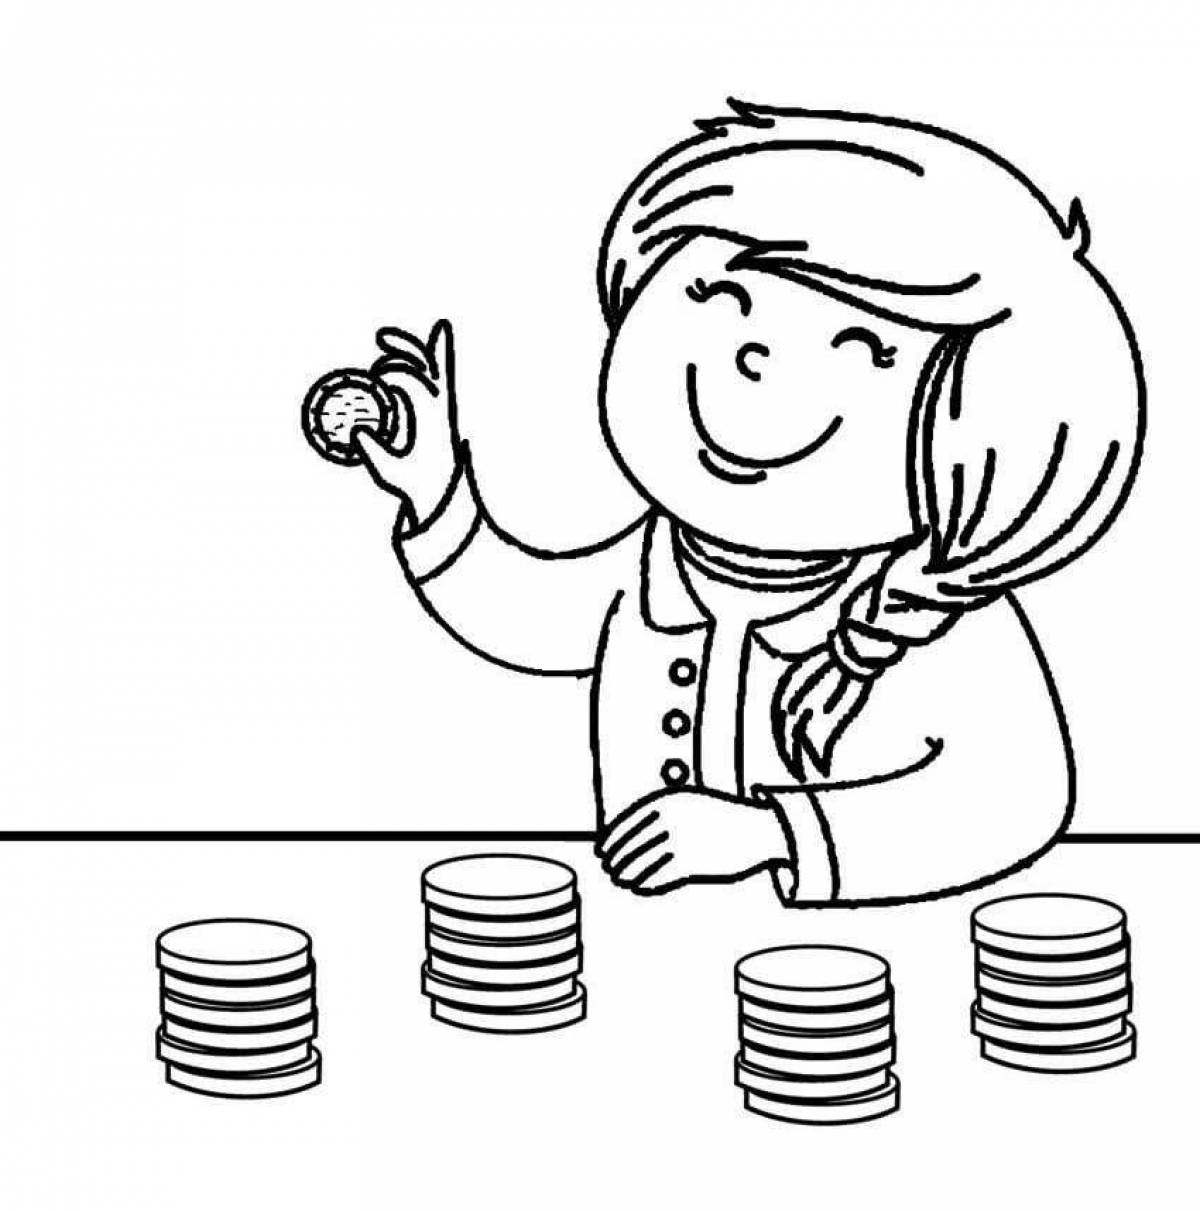 Colorful financial literacy coloring pages for preschoolers